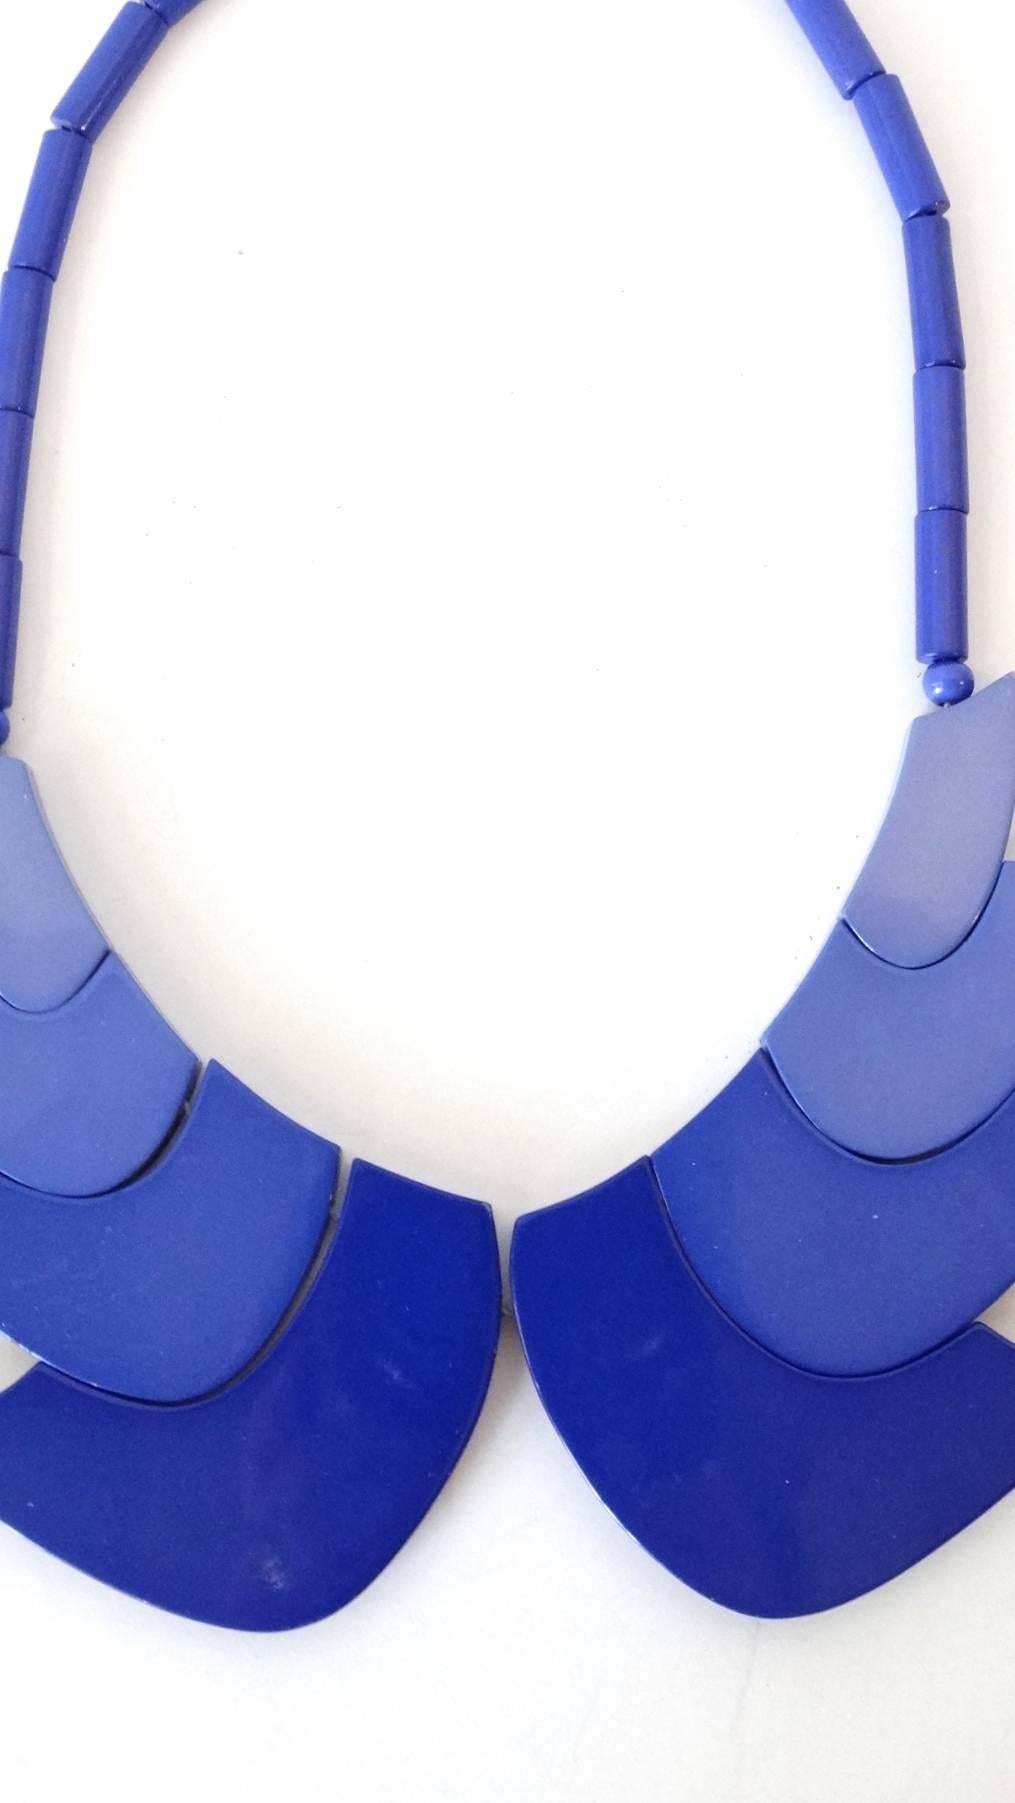 1970s bakelite necklace from none other than Guillemette L'Hoir Paris- designer of avant-garde art inspired jewelry made from Galalith. This piece is made out of various shades of Galalith blue arranged in a wavy, Peter-pan collar like structure.